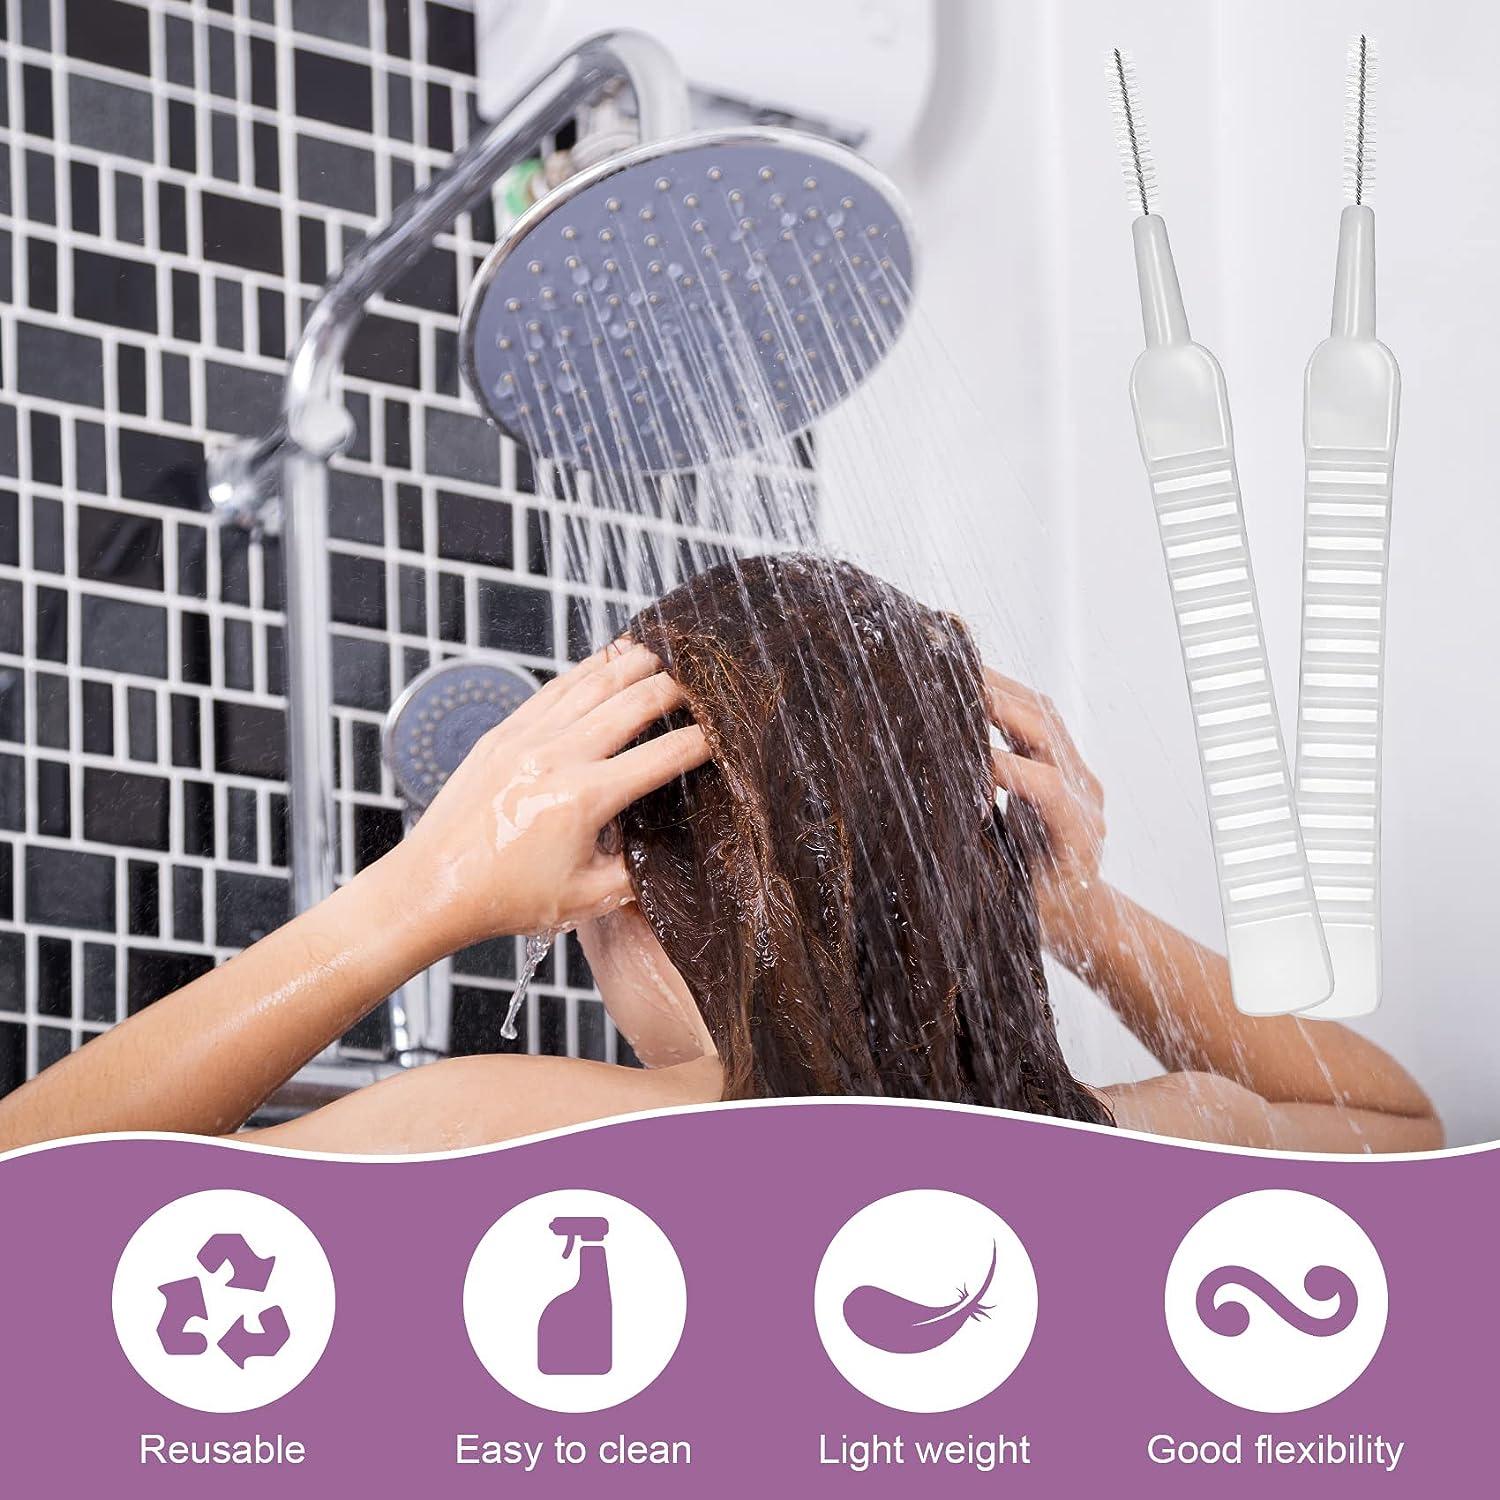 OIIKI 130pcs Shower Head Cleaning Brush Anti-Clogging Nylon Cleaning Brush  for Shower Nozzle Hole Cleaning Brush for Pore Gap Keyboard